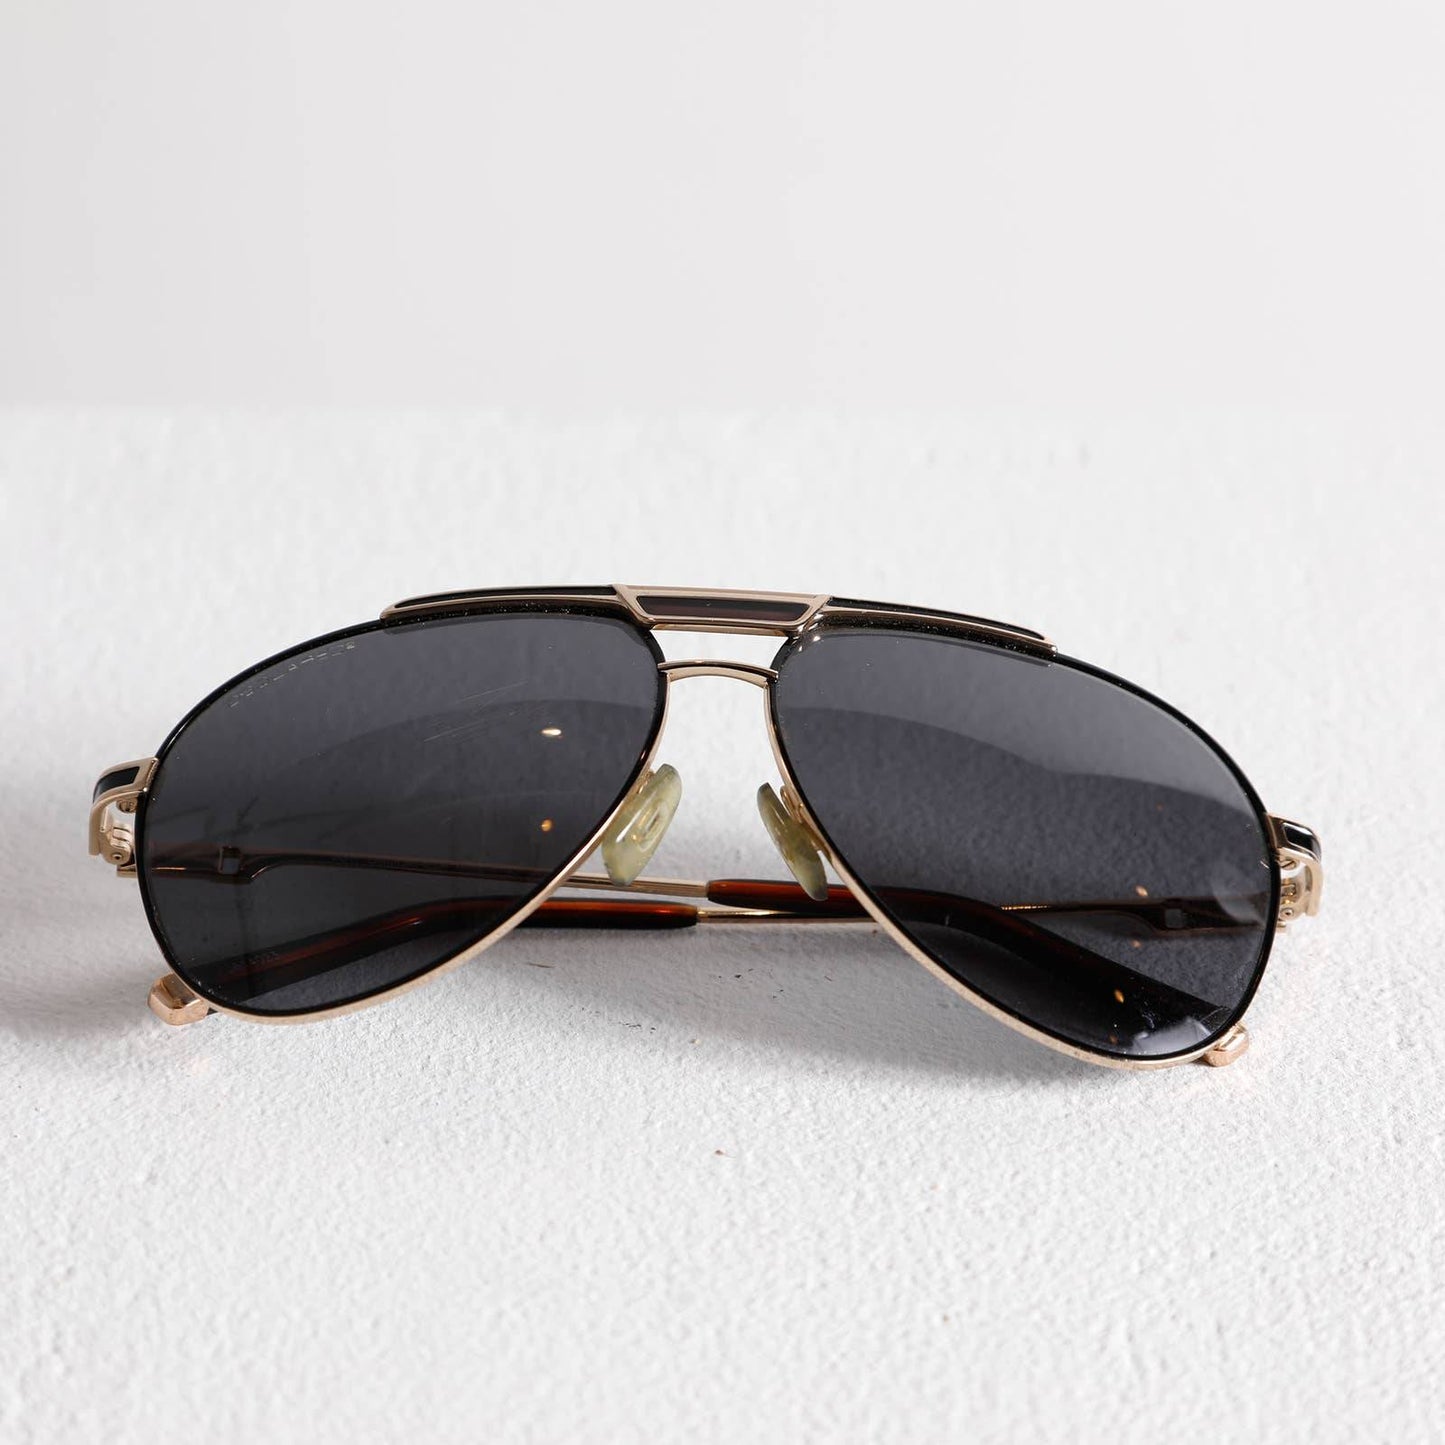 DSQUARED2 Black and Gold Sunglasses